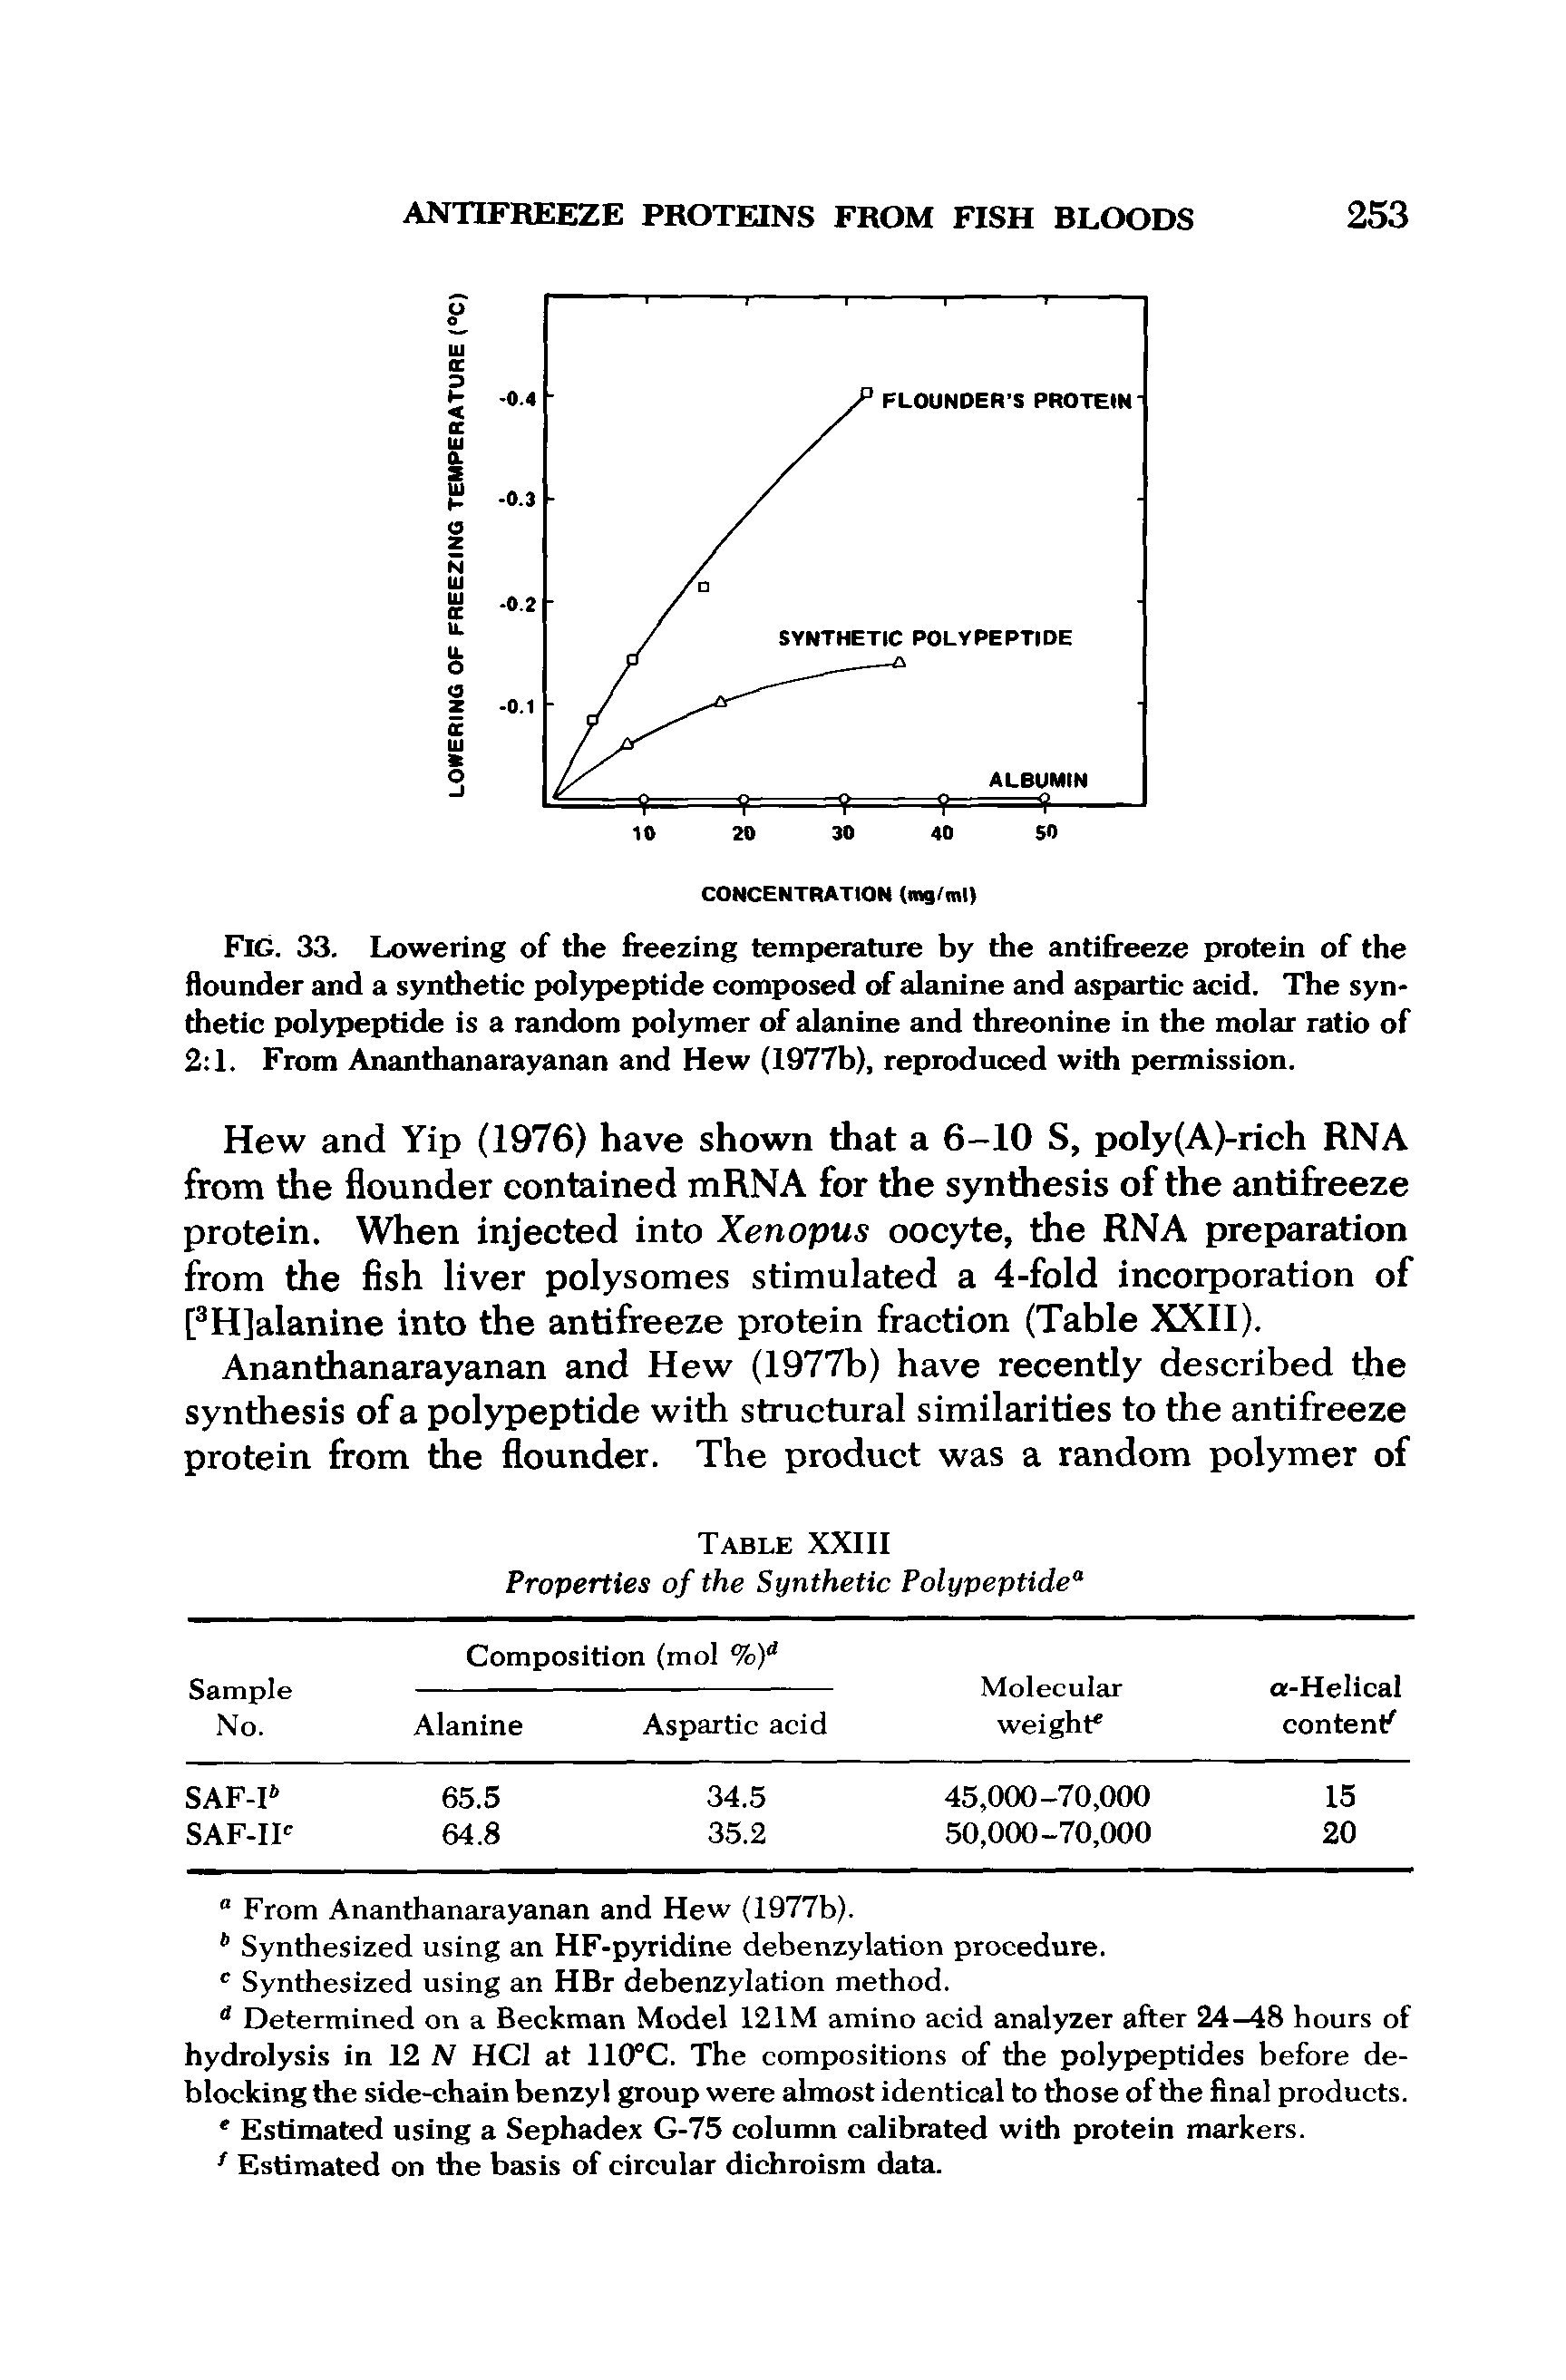 Fig. 33. Lowering of the freezing temperature by the antifreeze protein of the flounder and a synthetic polypeptide composed of alanine and aspartic acid. The synthetic polypeptide is a random polymer of alanine and threonine in the molar ratio of 2 1. From Ananthanarayanan and Hew (1977b), reproduced with permission.